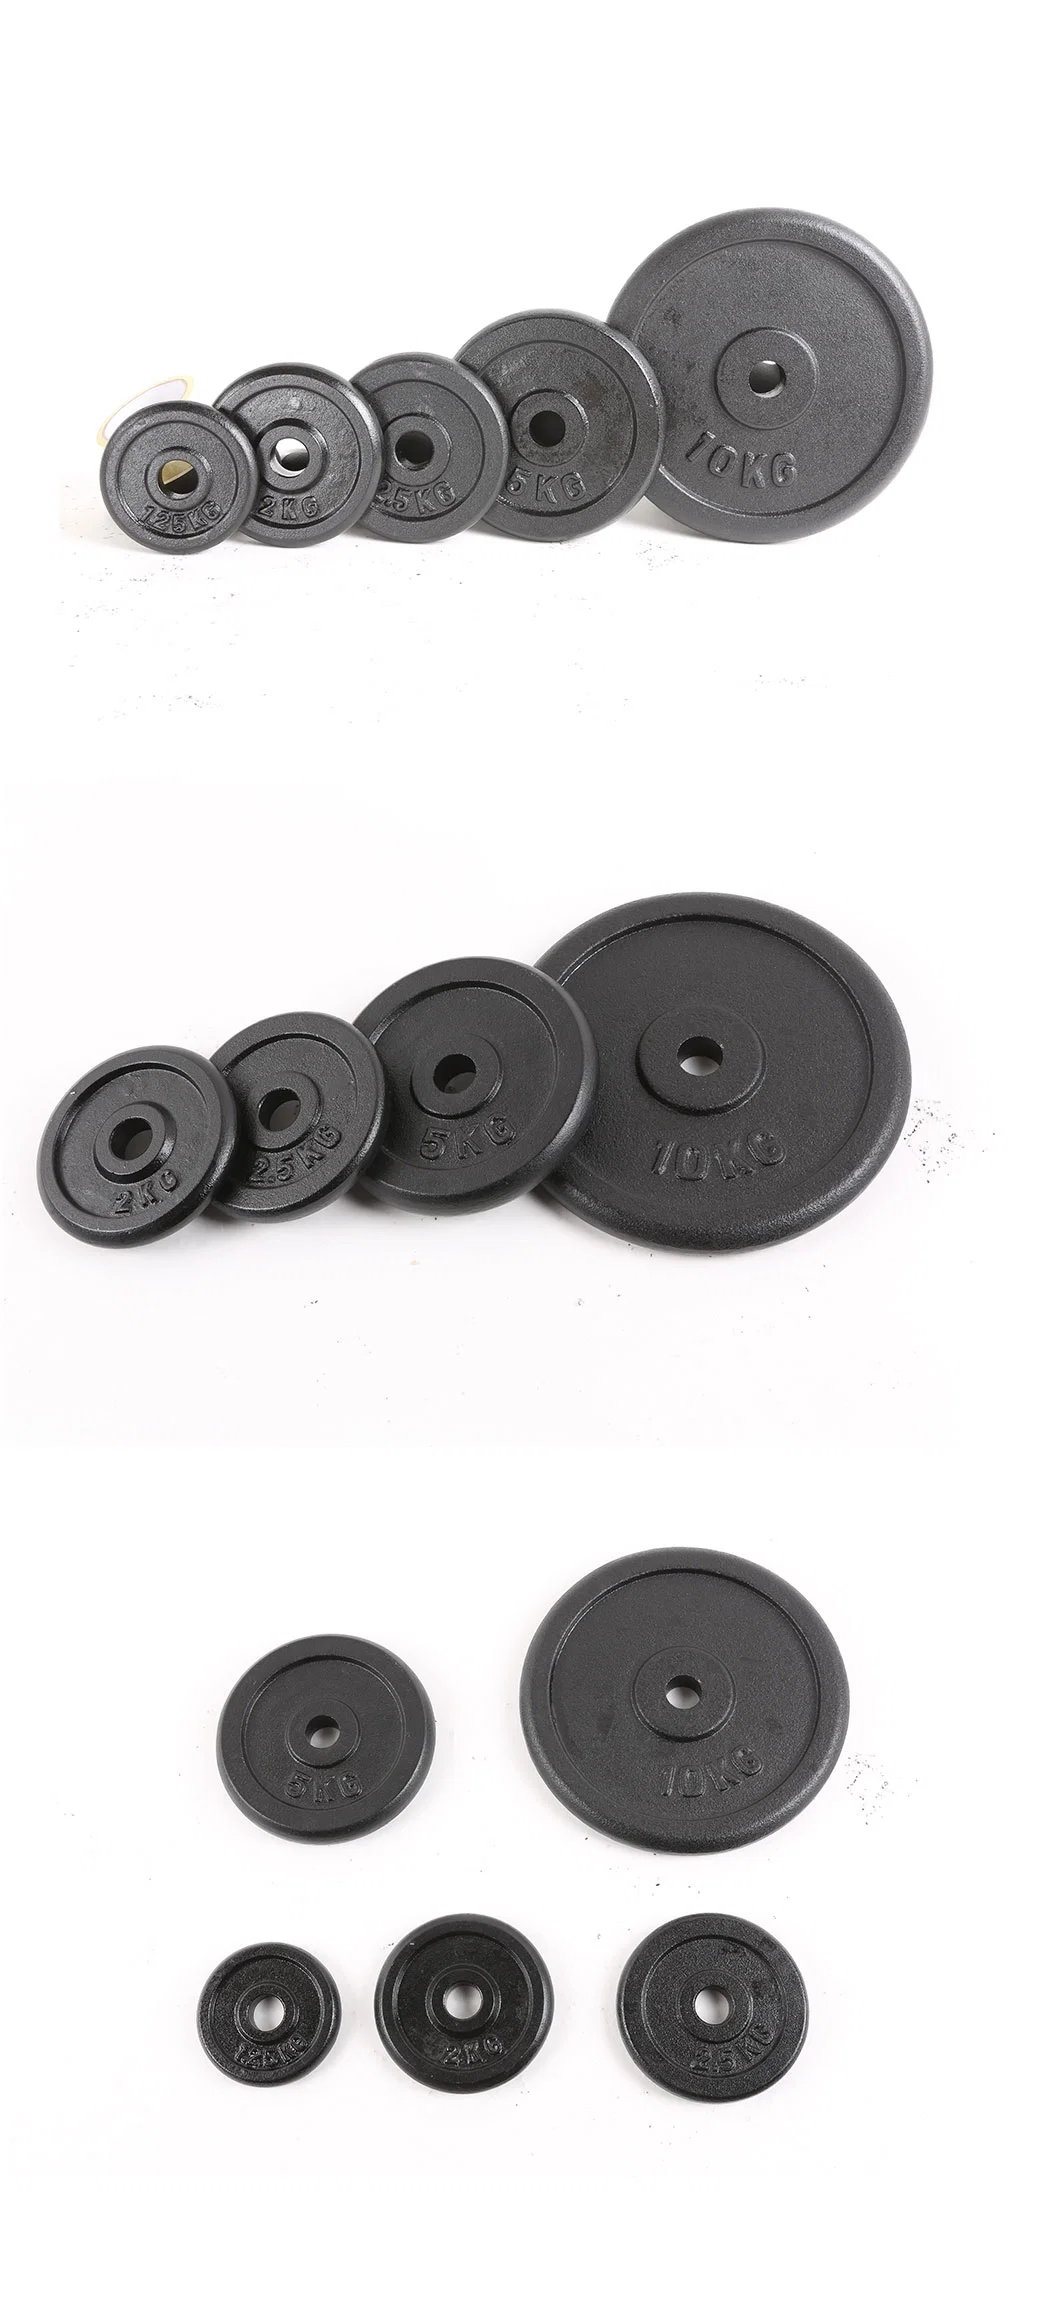 Black Painting Barbell Grip Weight Plates for Home